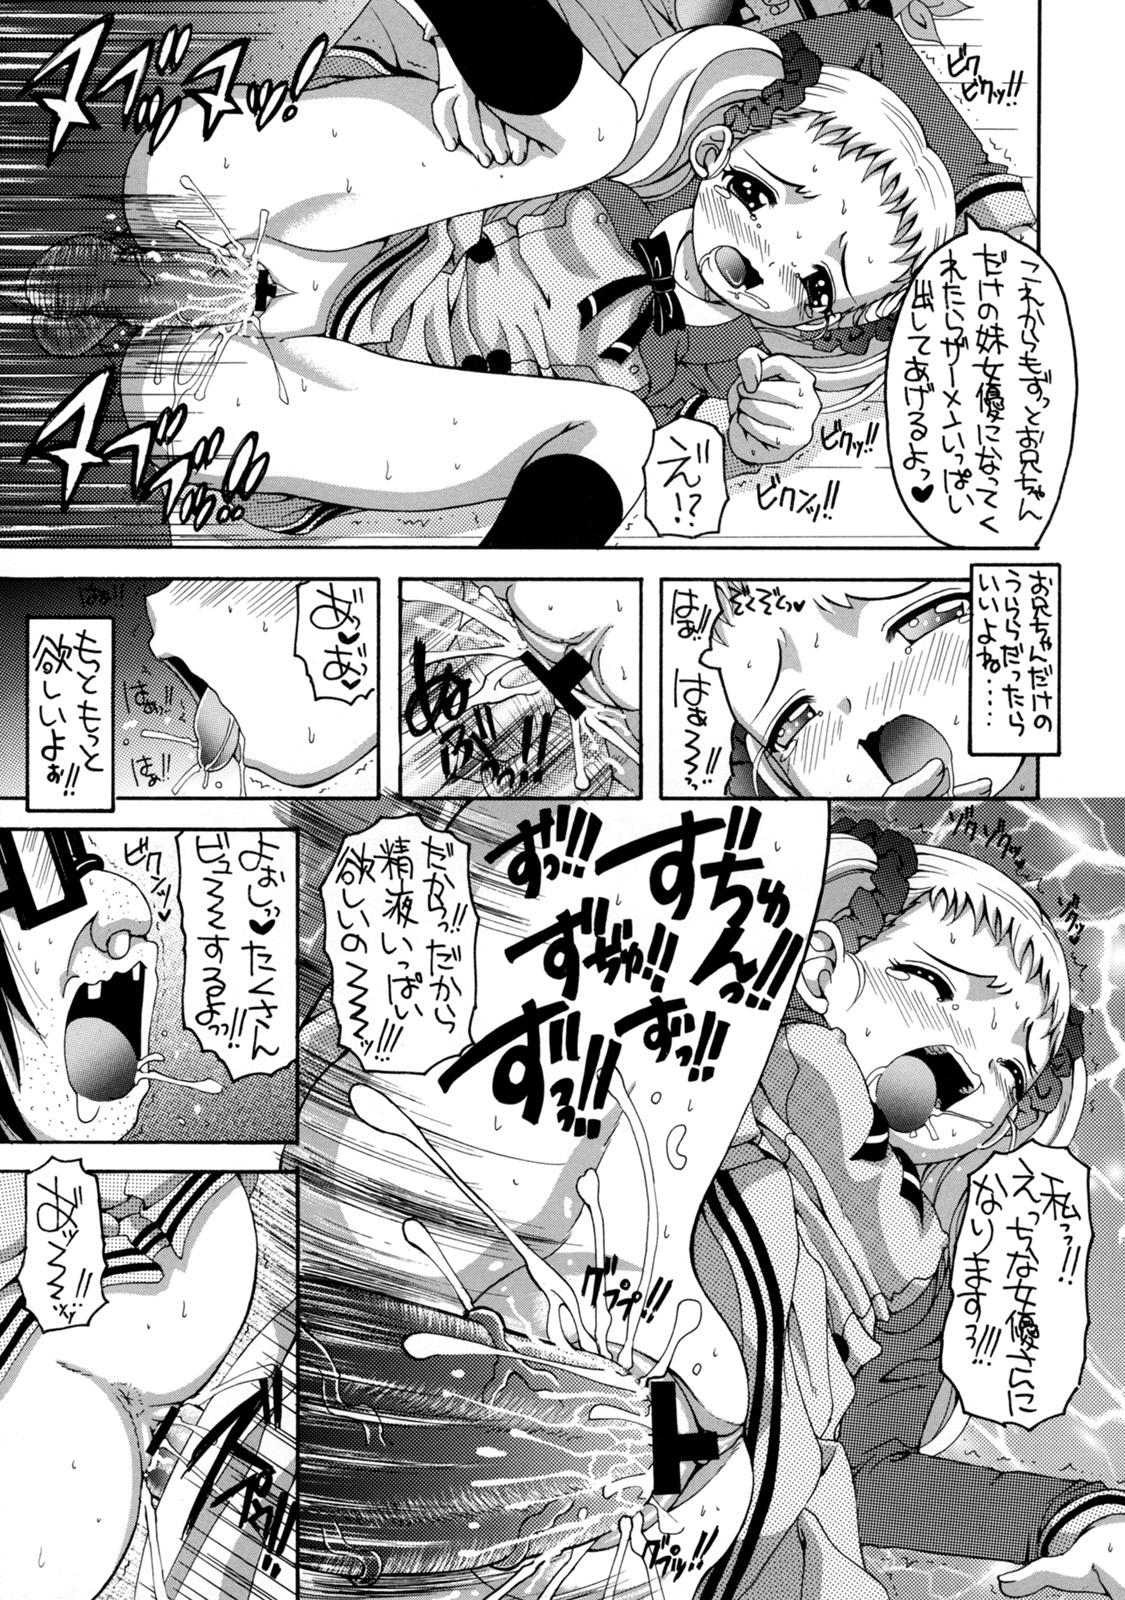 Chaturbate Yes! Five 3 - Pretty cure Yes precure 5 Master - Page 12